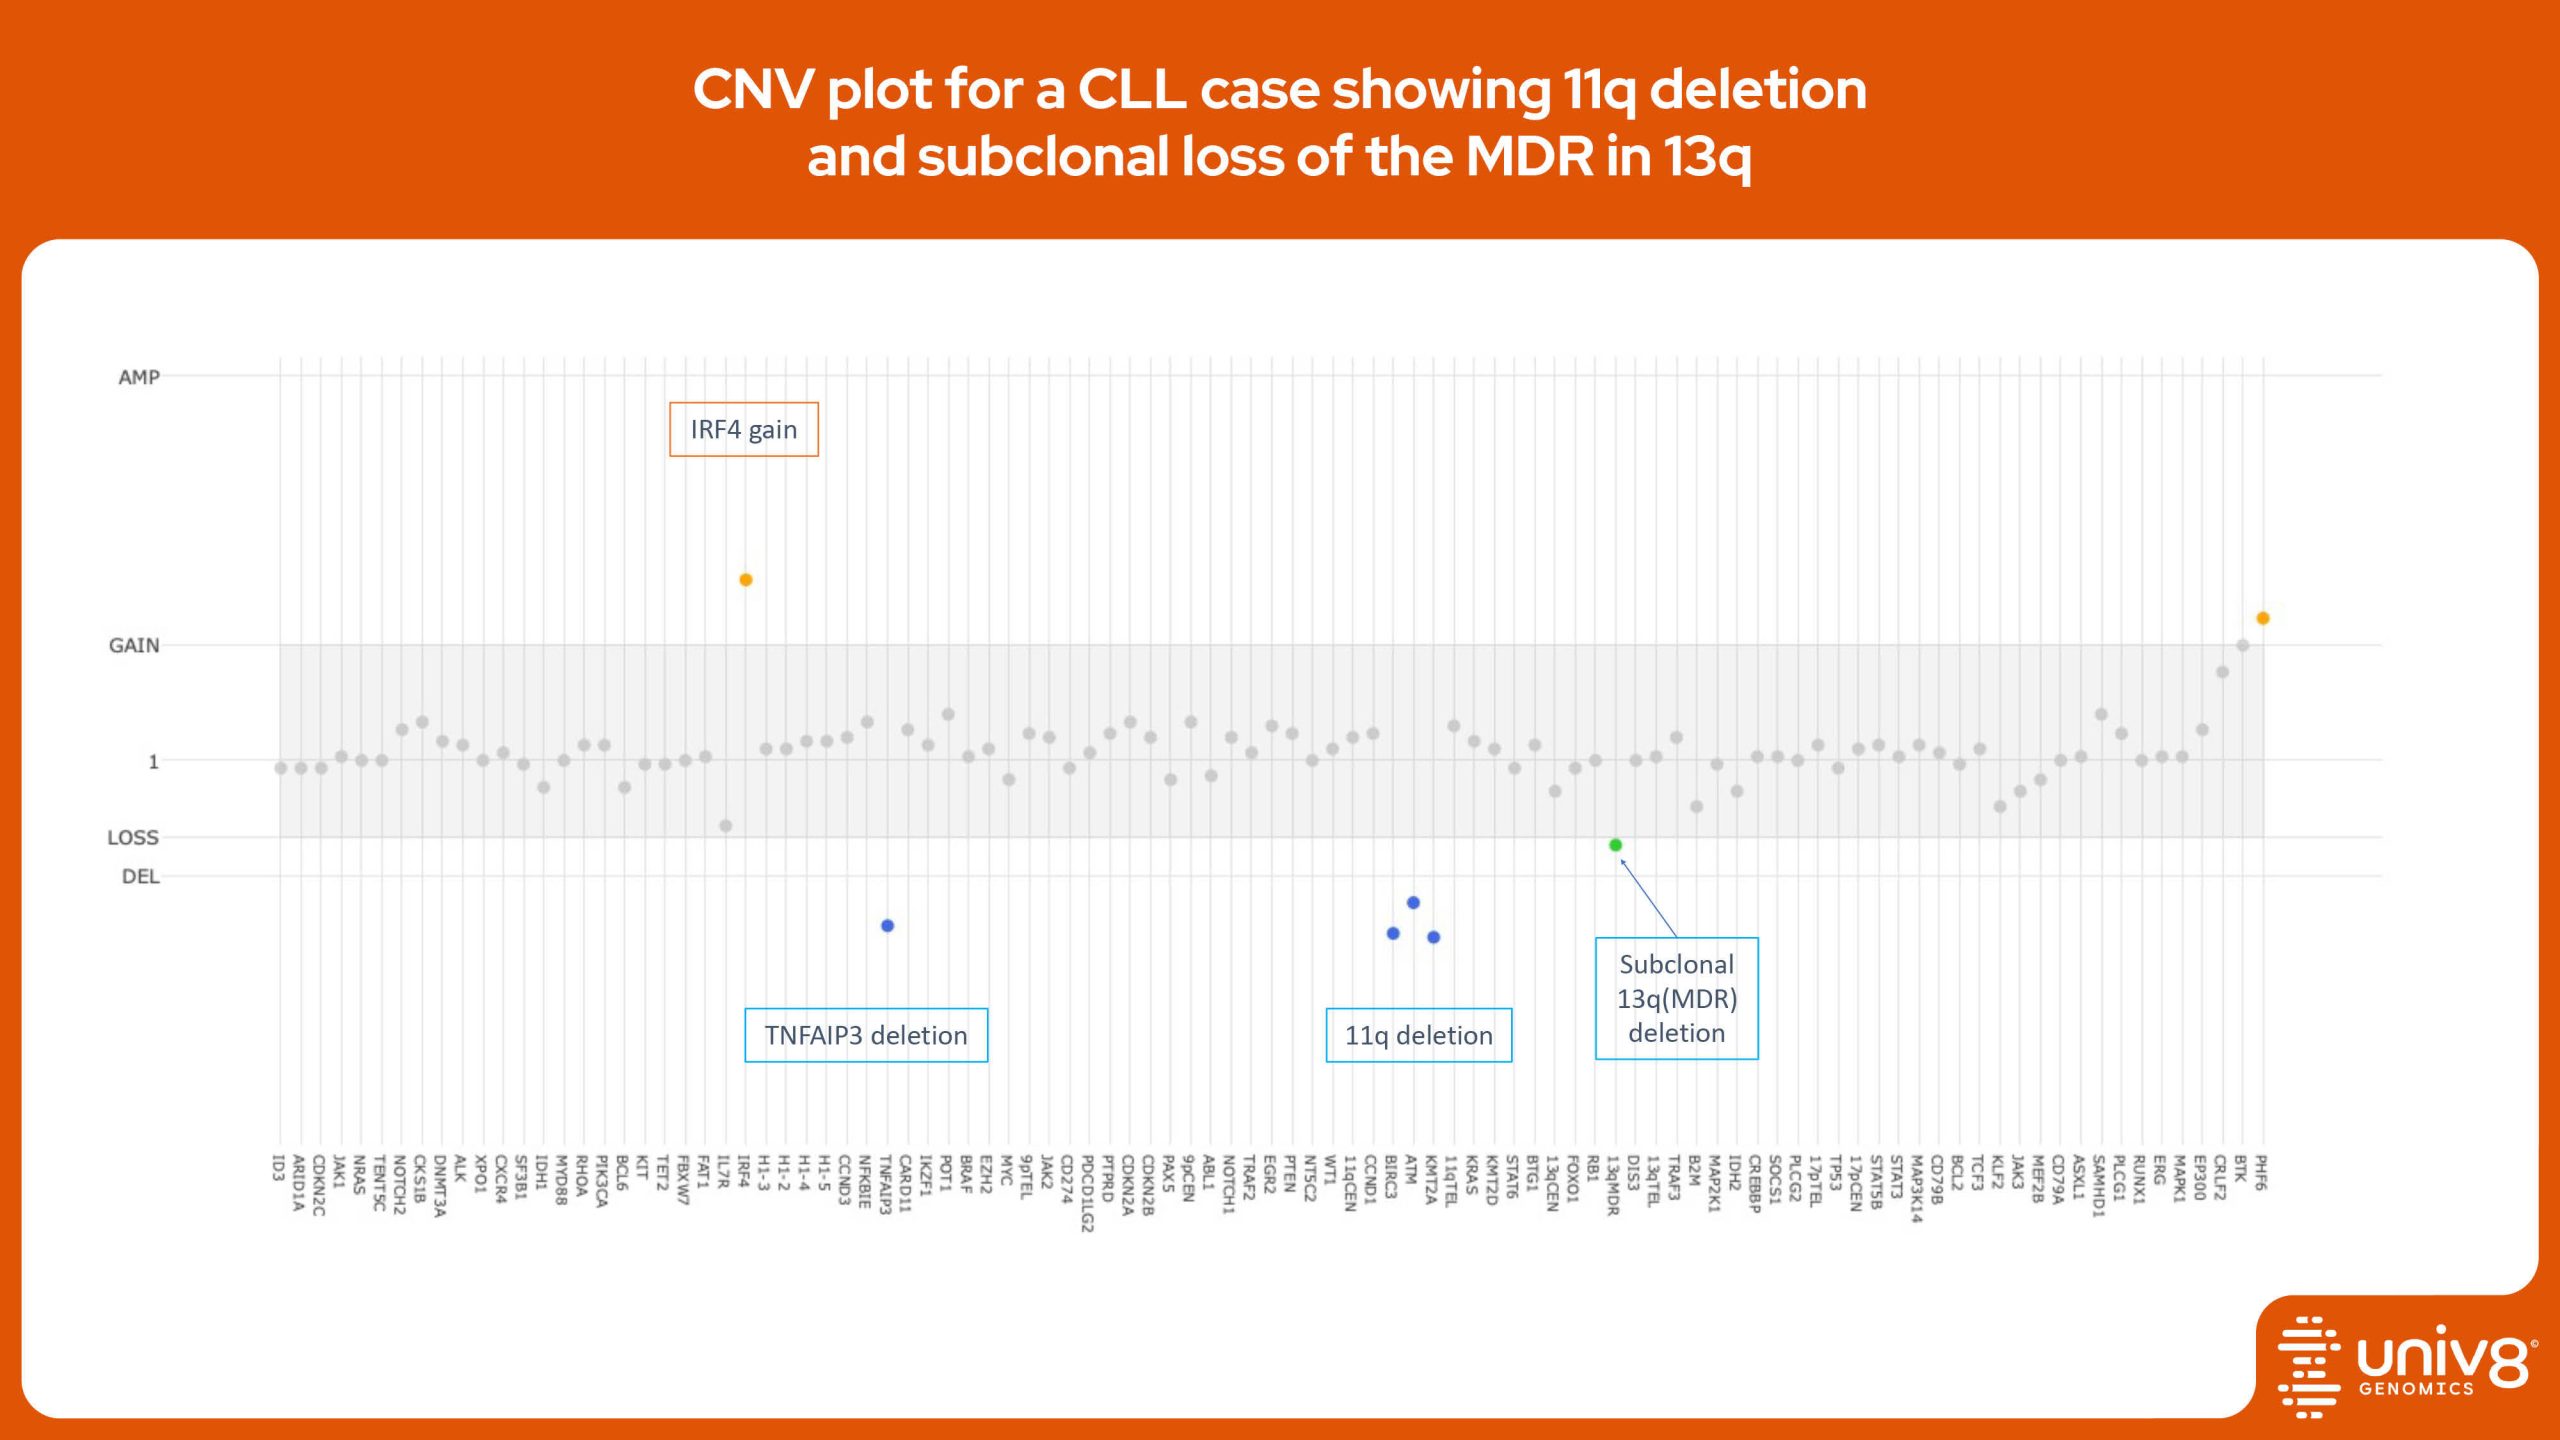 CNA plot for a CLL case showing 11q deletion and subclonal loss of the MDR in 13q